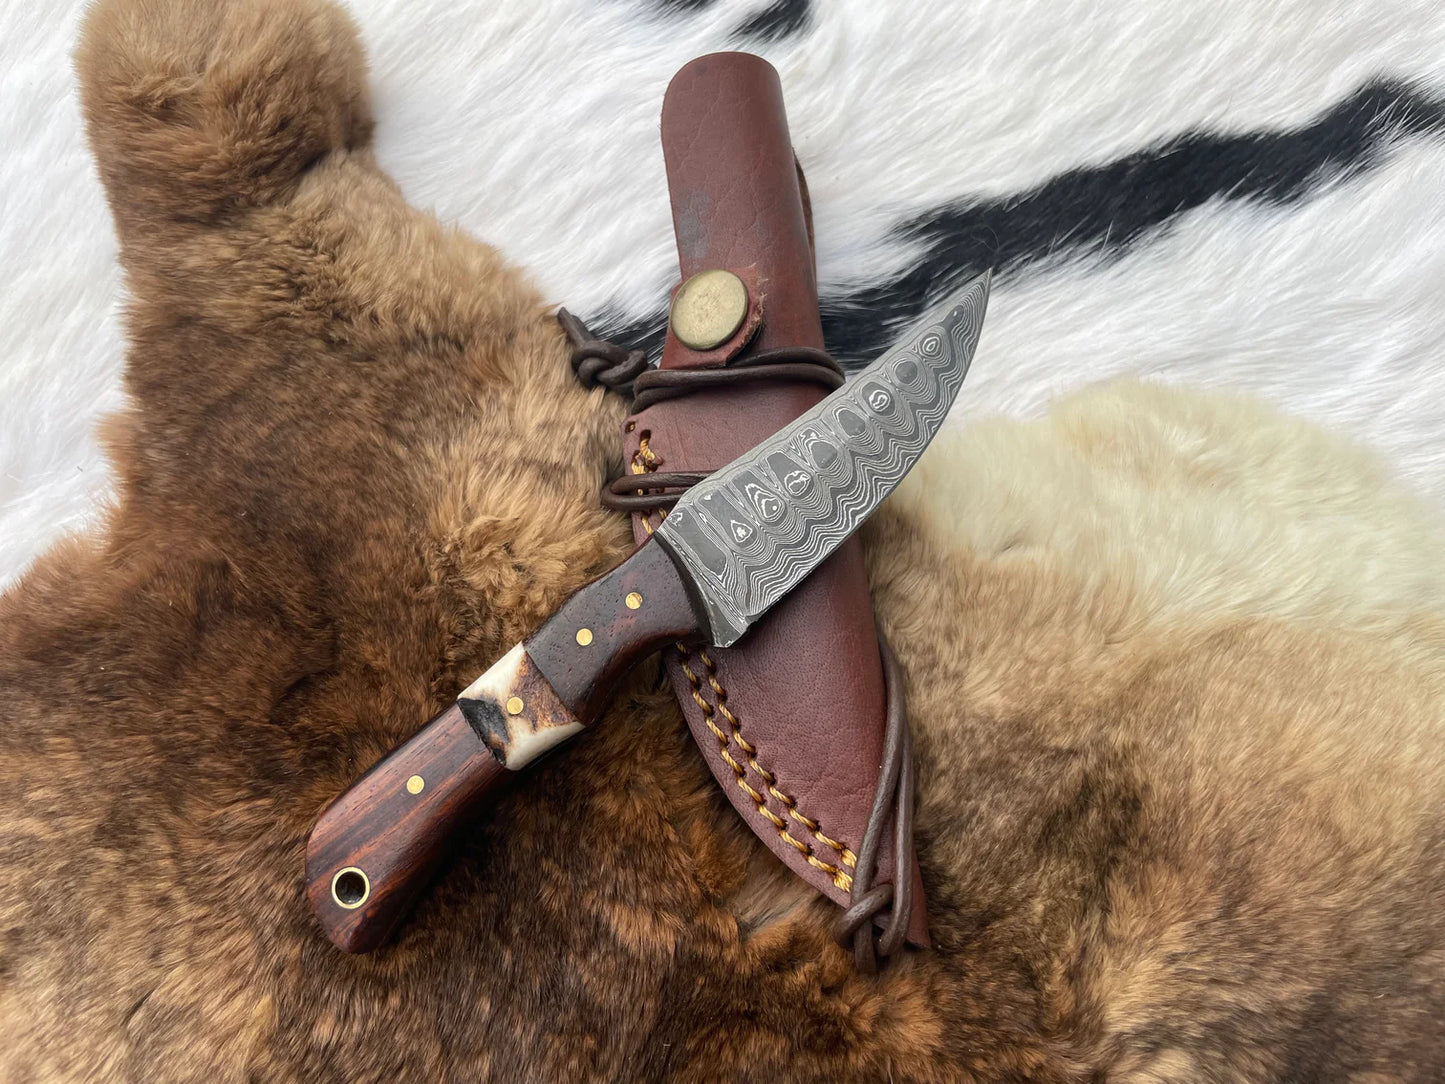 DAMASCUS STEEL SKINNER KNIFE WITH ROSEWOOD & STAG GRIP